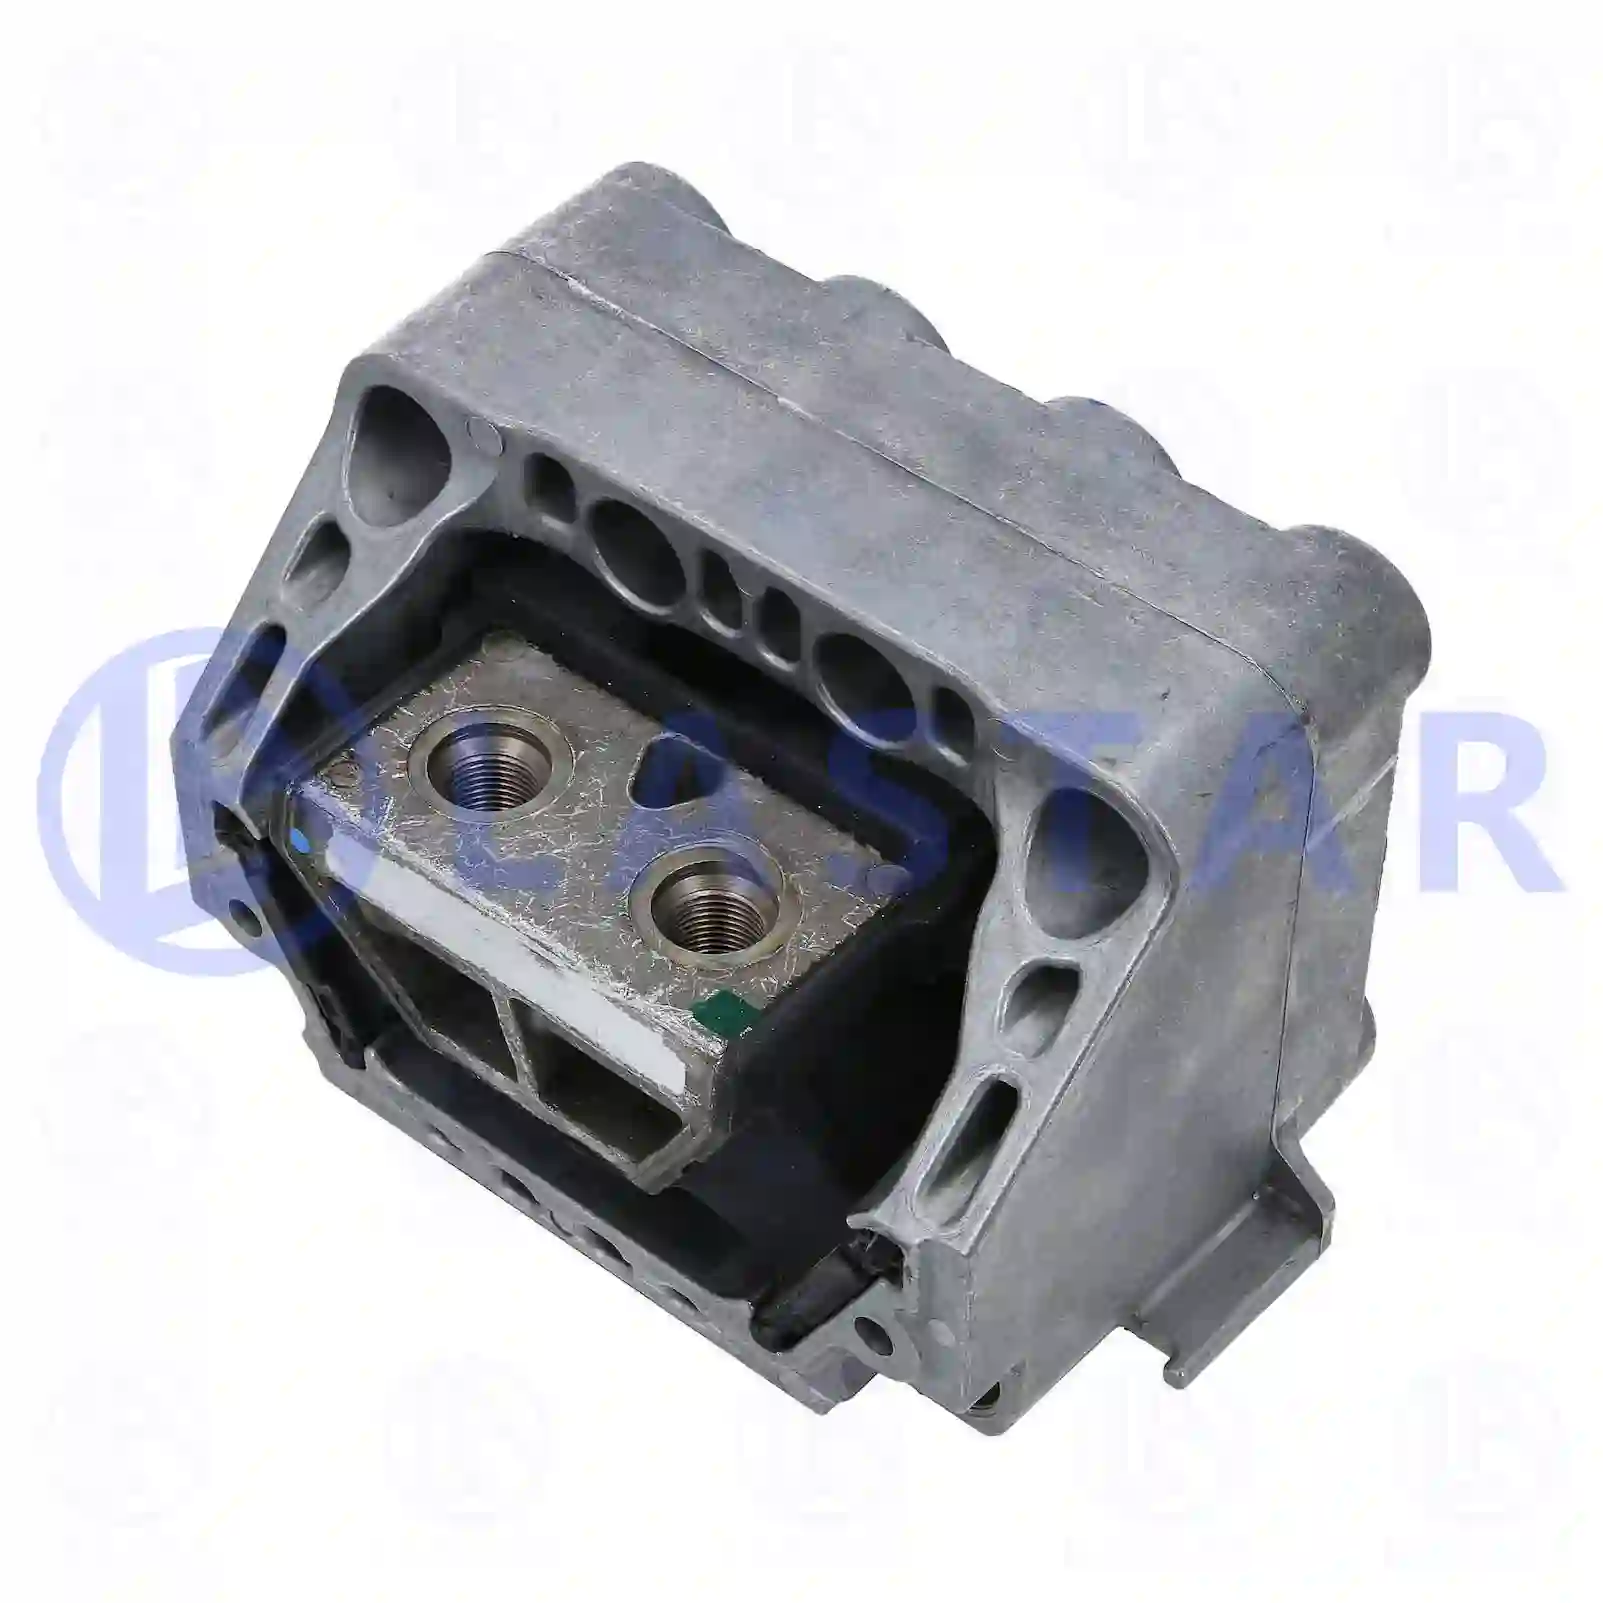 Engine mounting, rear, 77702456, 9602412213 ||  77702456 Lastar Spare Part | Truck Spare Parts, Auotomotive Spare Parts Engine mounting, rear, 77702456, 9602412213 ||  77702456 Lastar Spare Part | Truck Spare Parts, Auotomotive Spare Parts